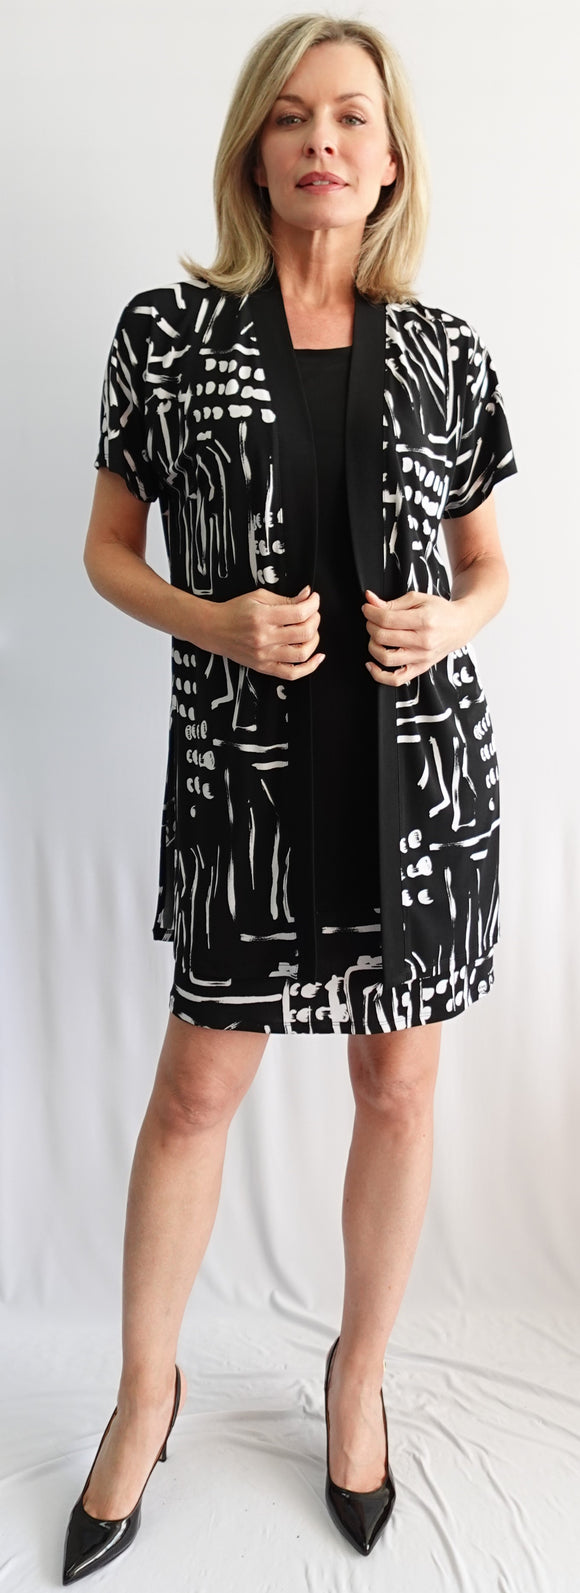 2-piece set (dress and jacket) with black and white patterns, from SOFT WORKS #97241